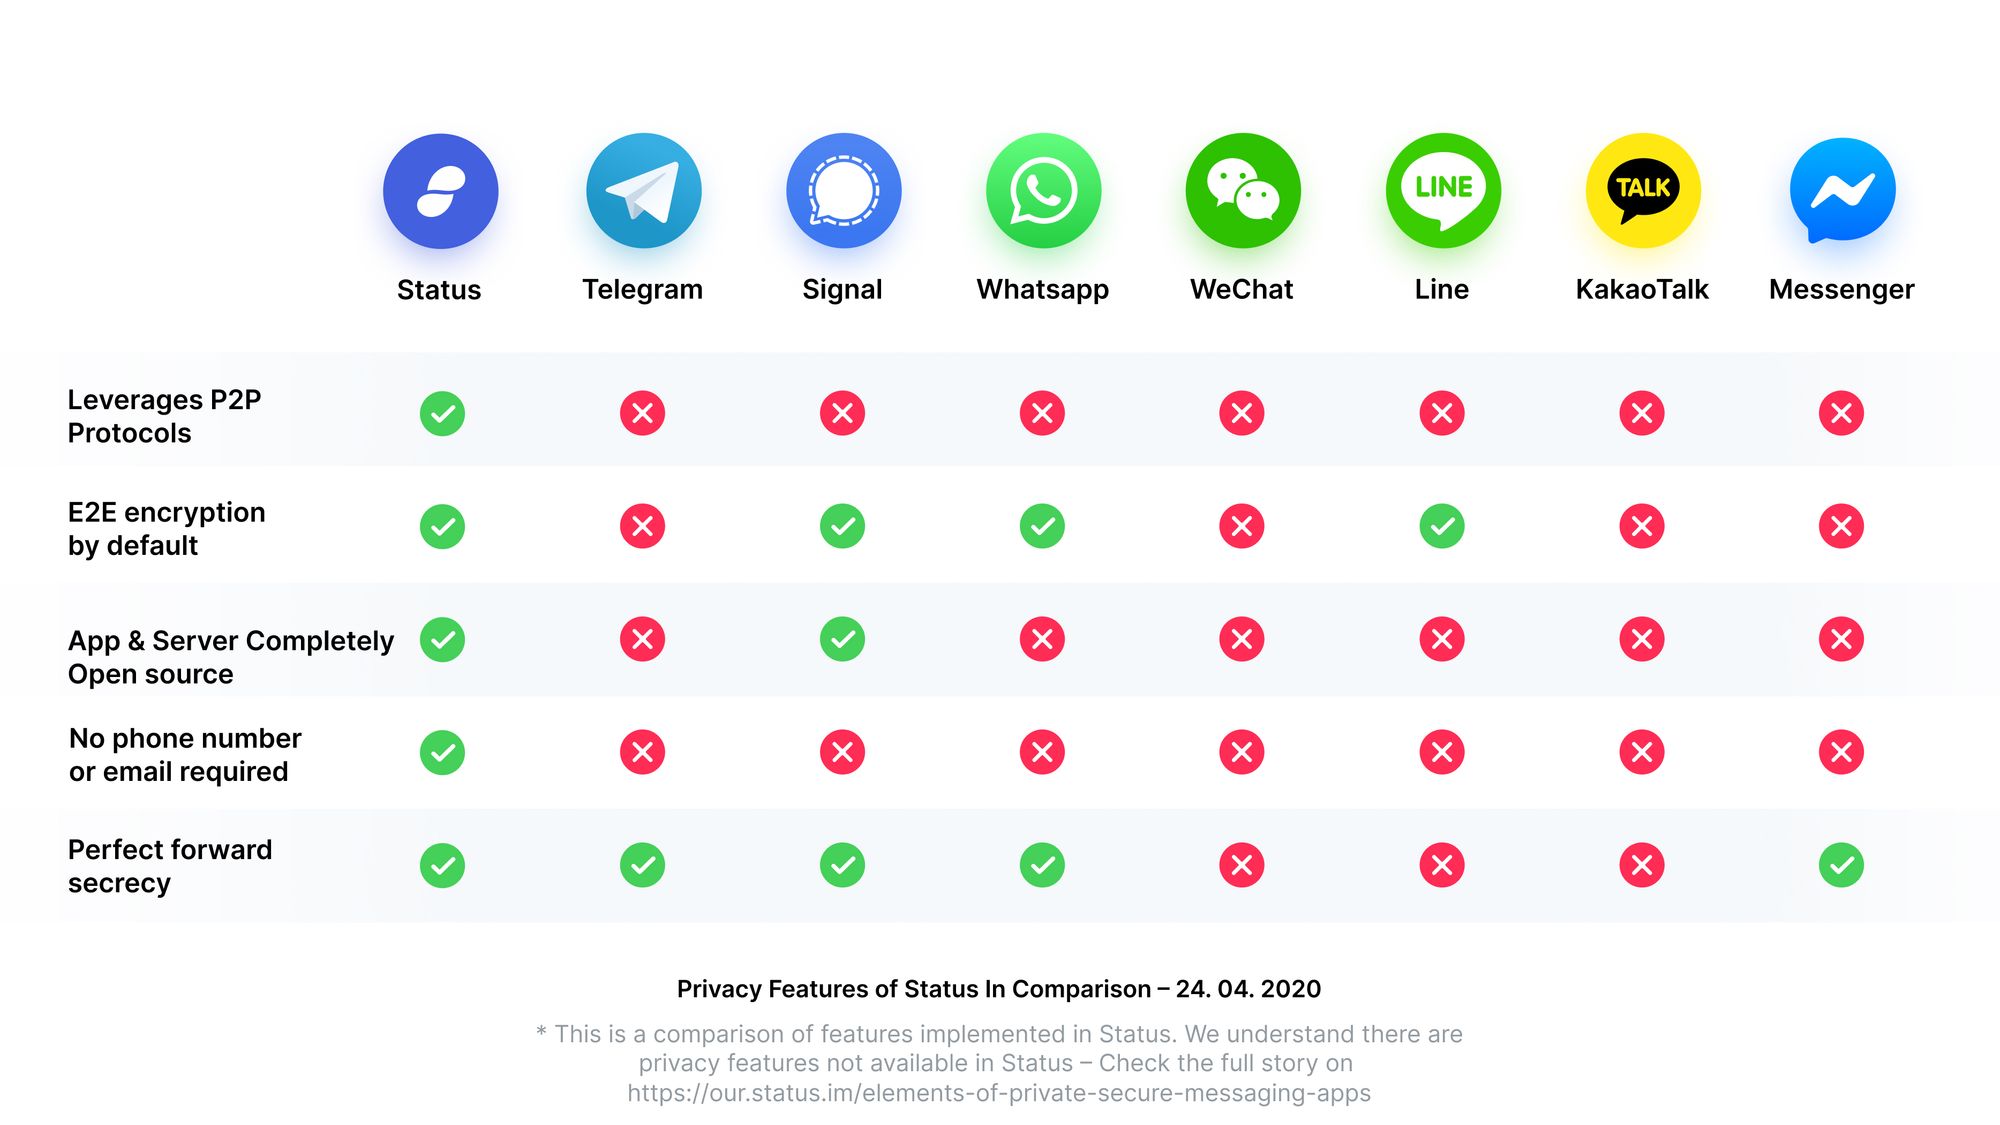 How To Choose The Most Secure Messenger?